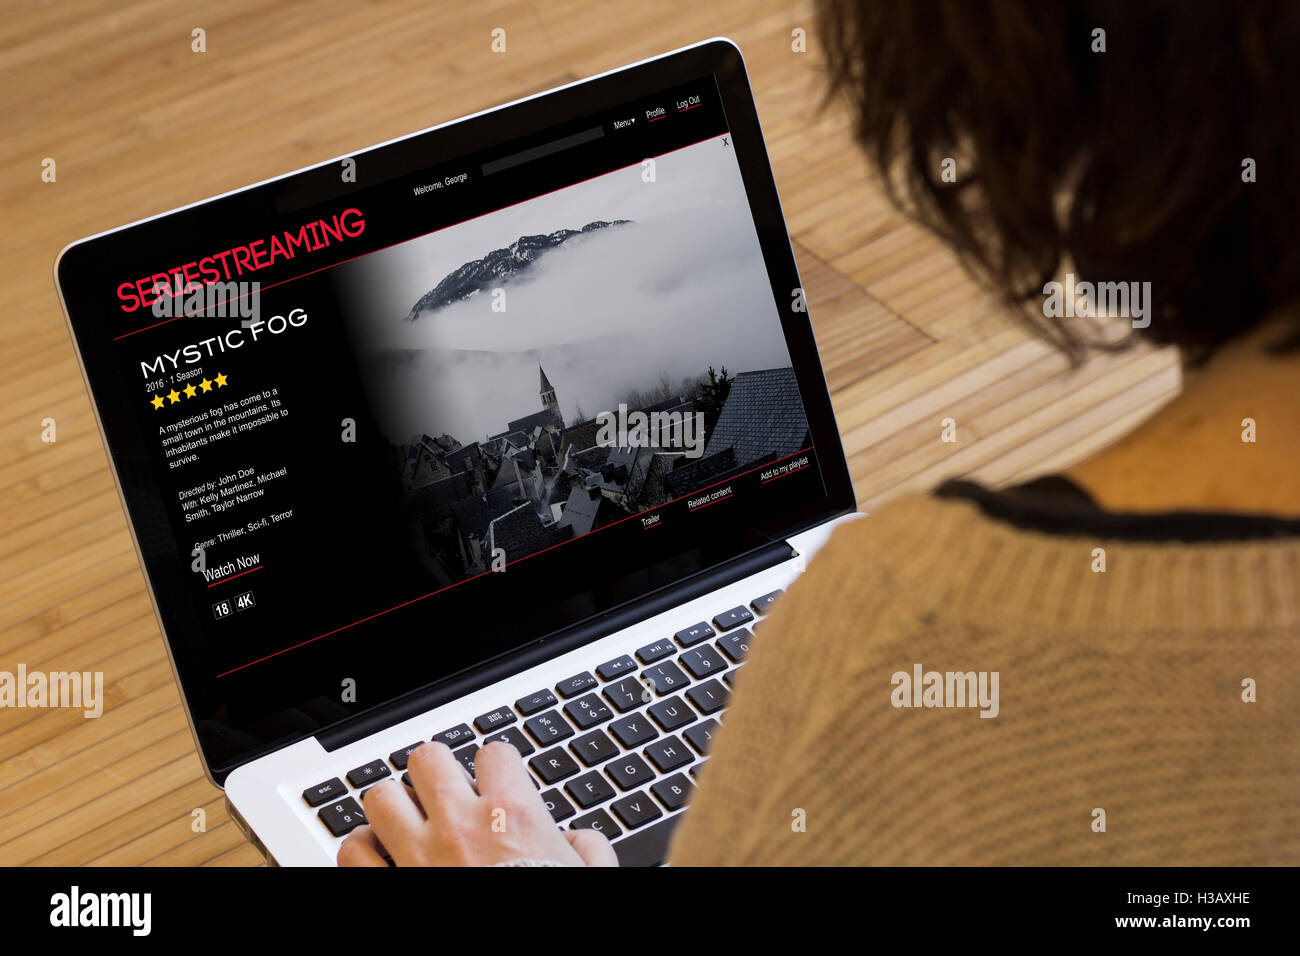 video on demand concept: series streaming on a laptop screen. Screen graphics are made up. Stock Photo